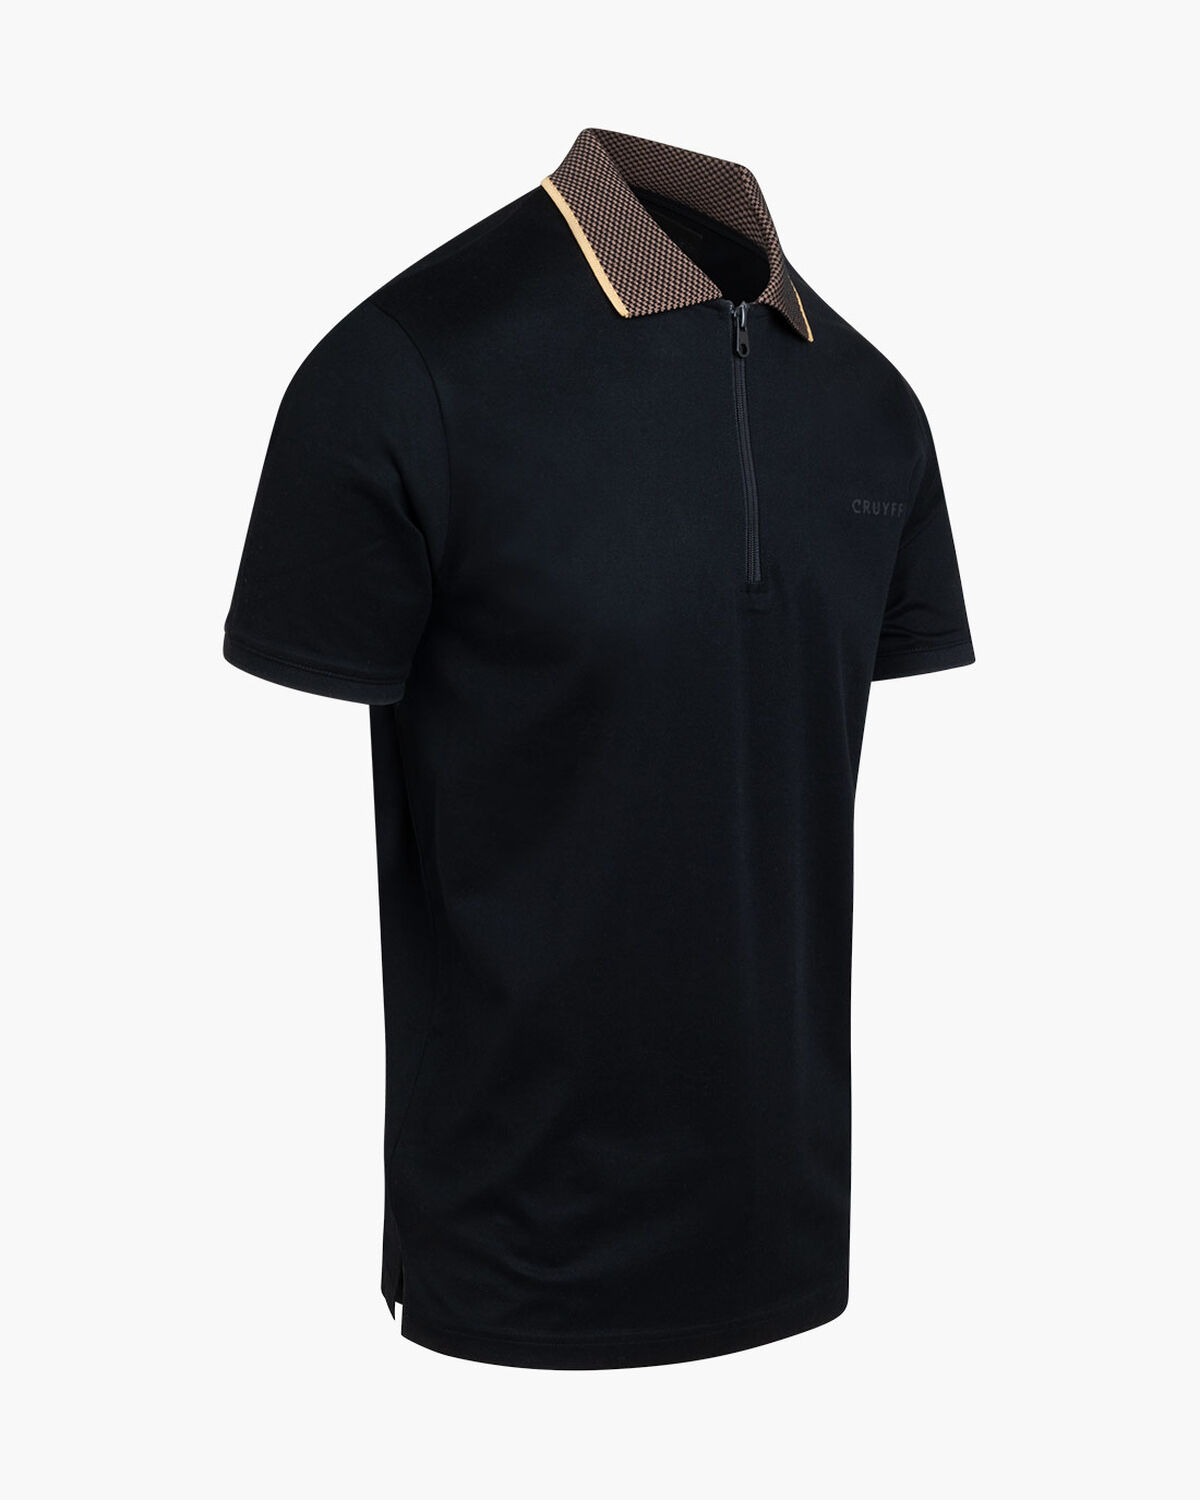 Chain Repeat Polo SS, Black/Gold, hi-res